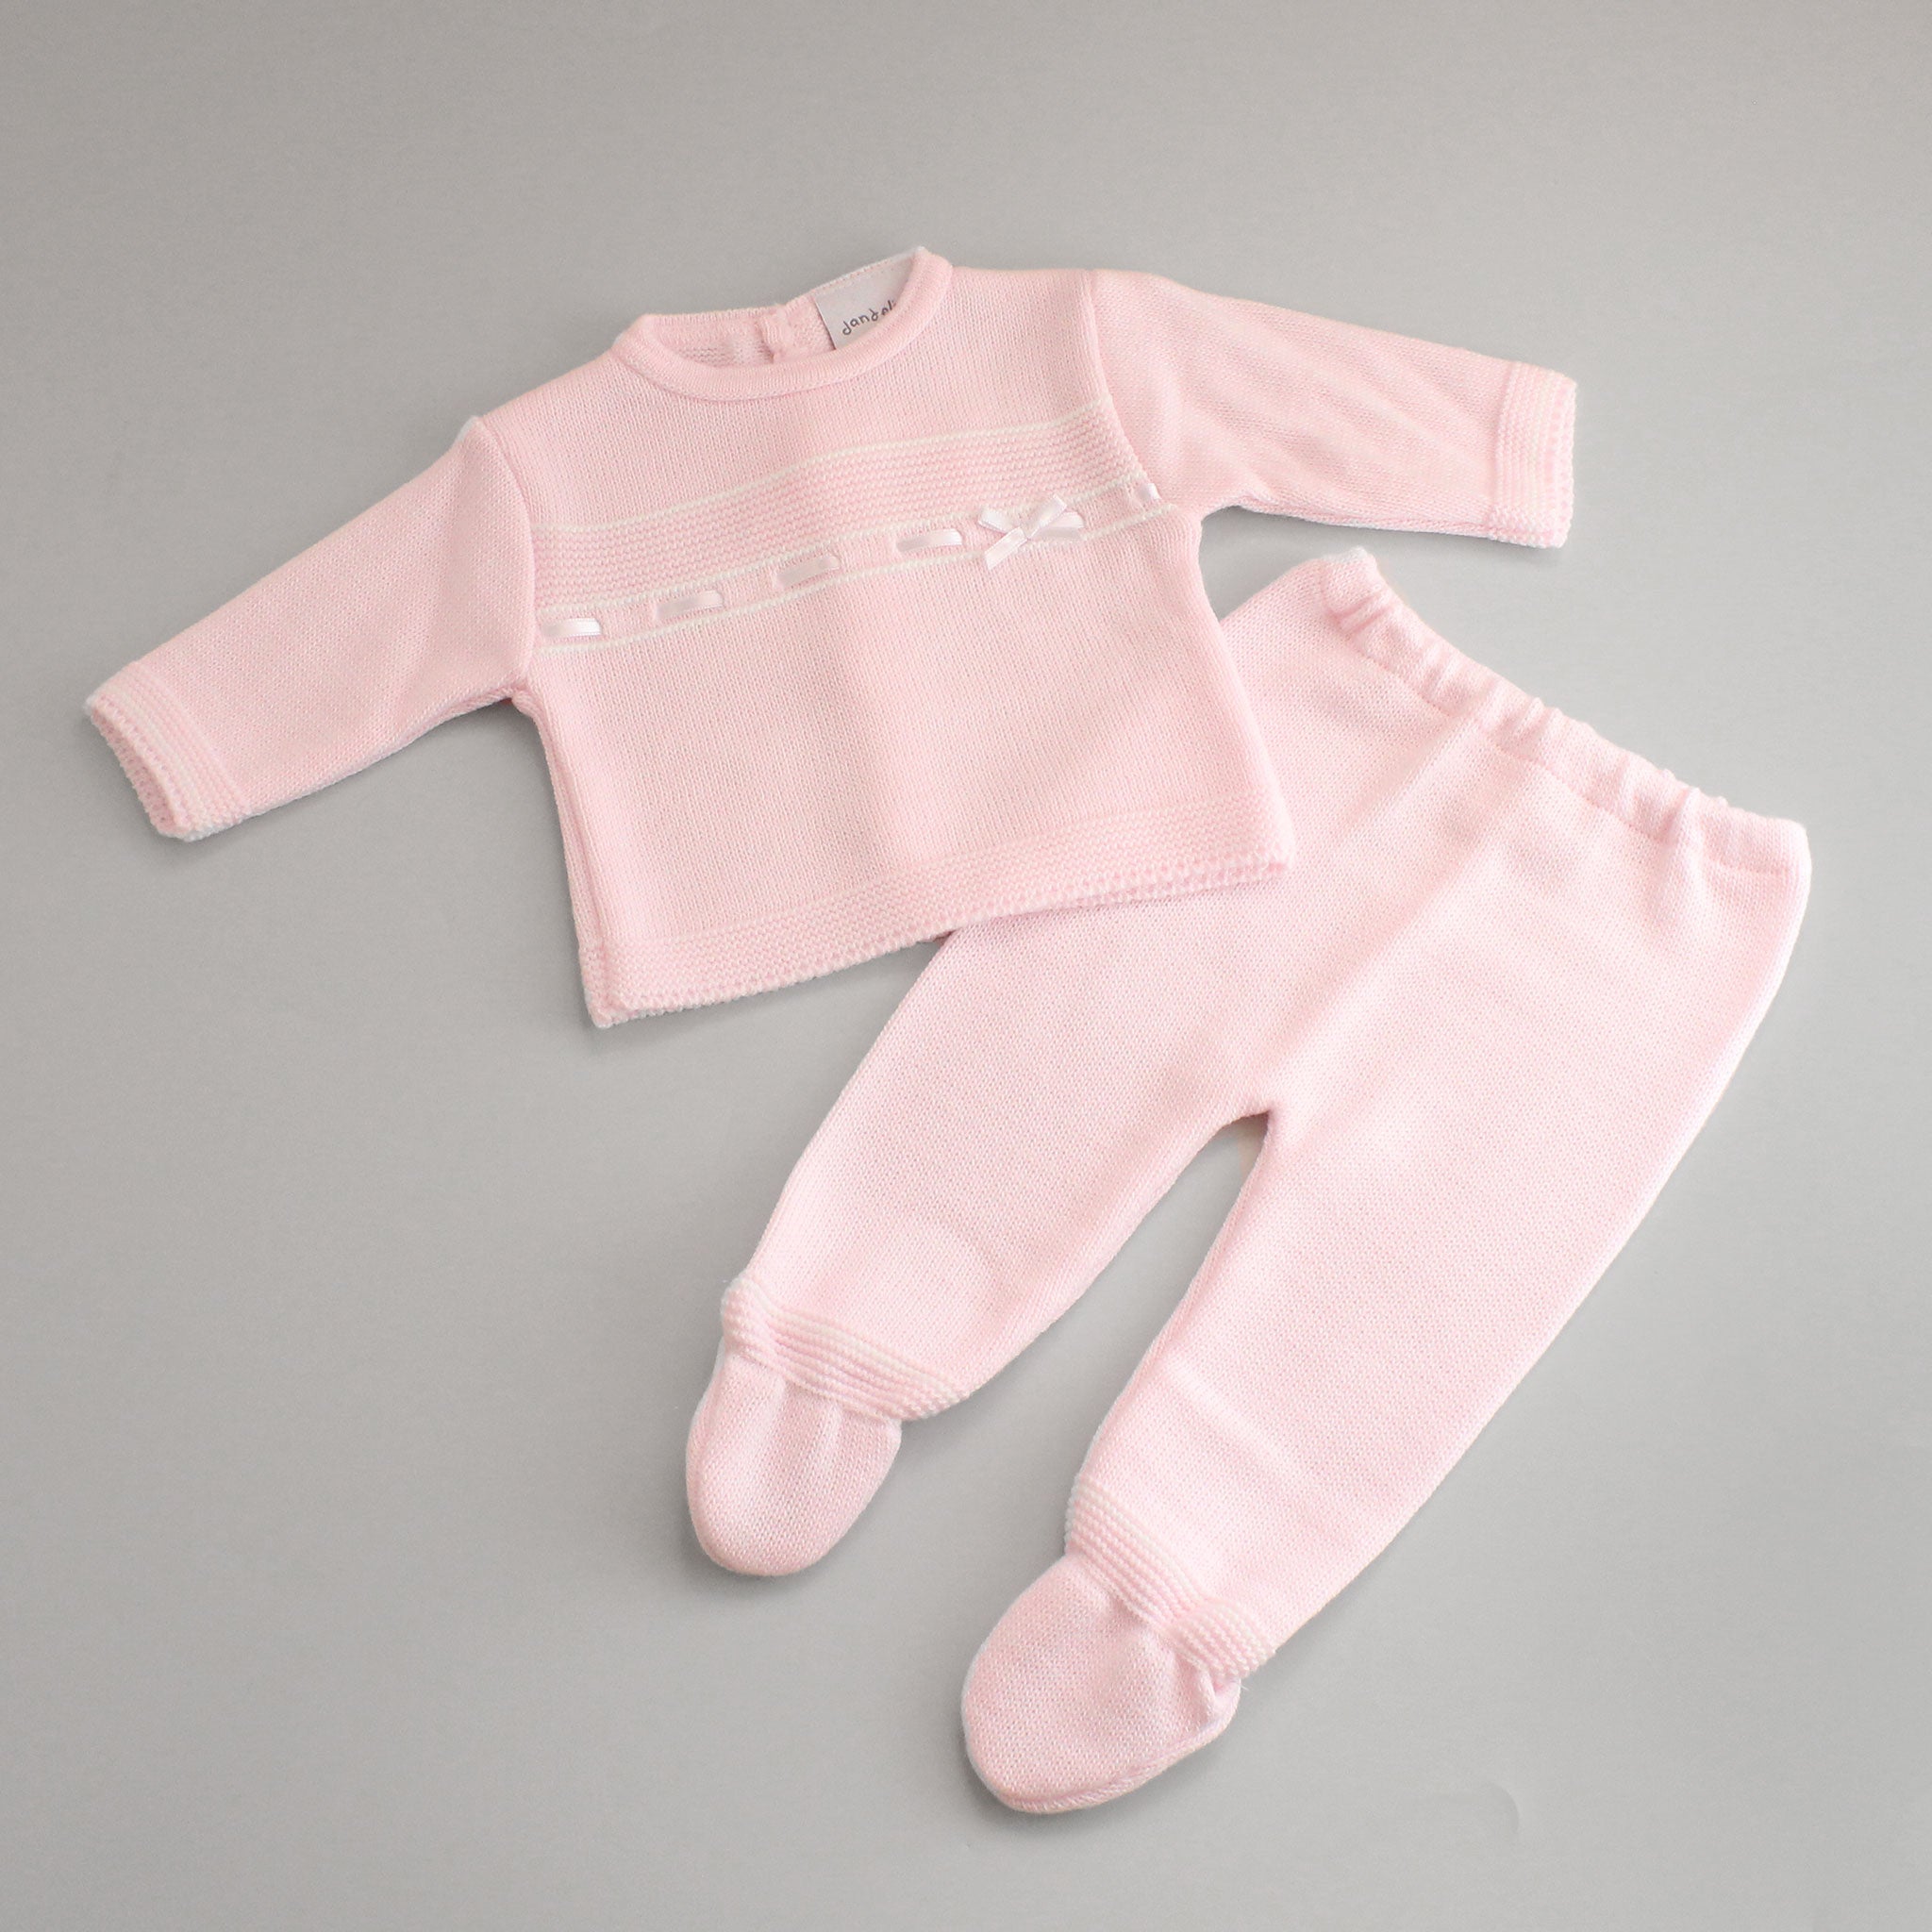 2 piece pink knitted baby outfit